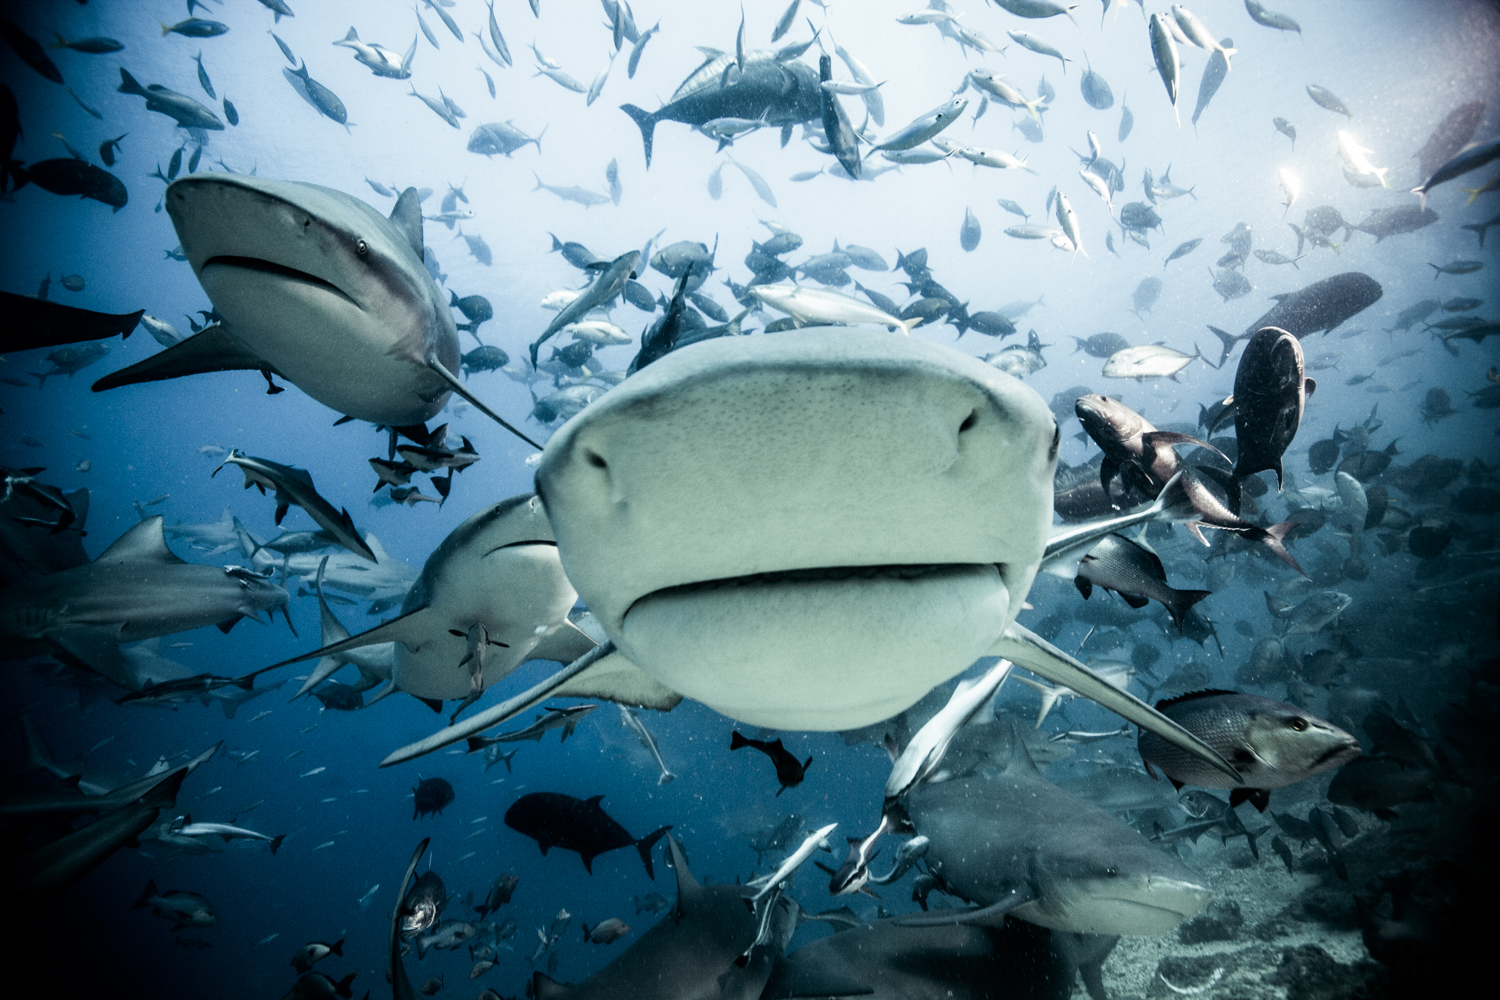 SHARKS. Face-to-Face with the Ocean's Endangered Predator